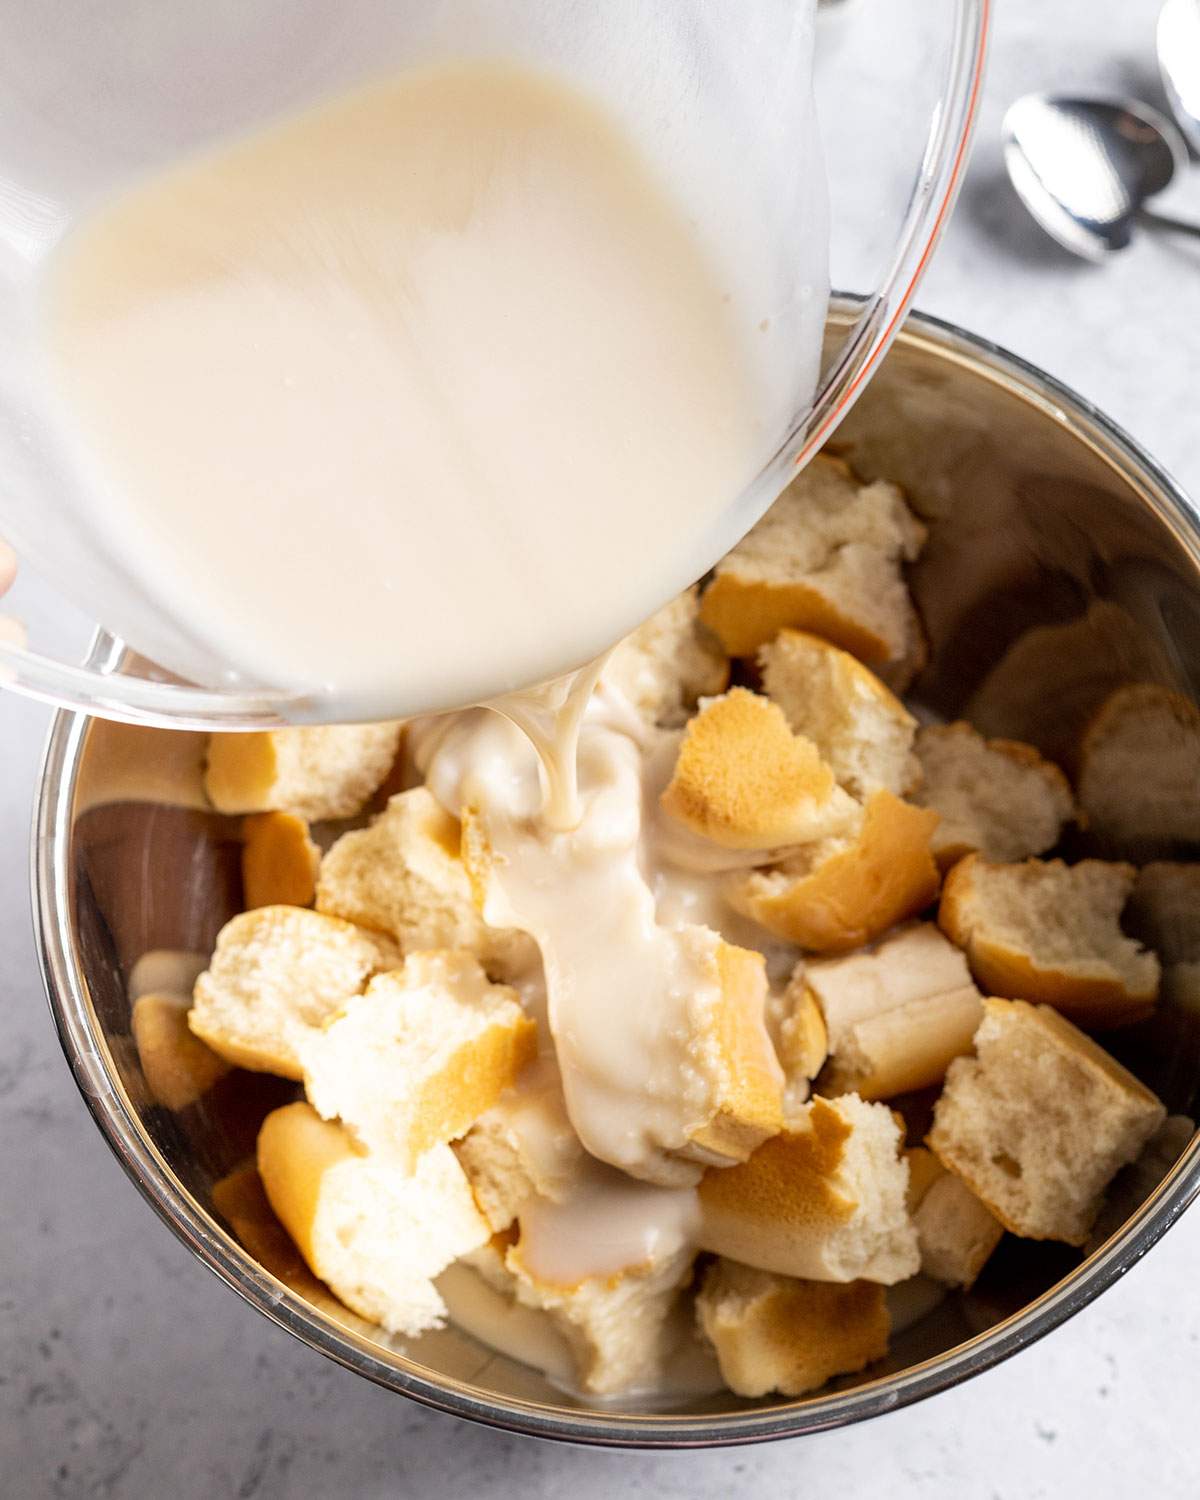 Pouring a mix of vegan condensed milk and evaporated coconut milk onto stale bread in a mixing bowl.